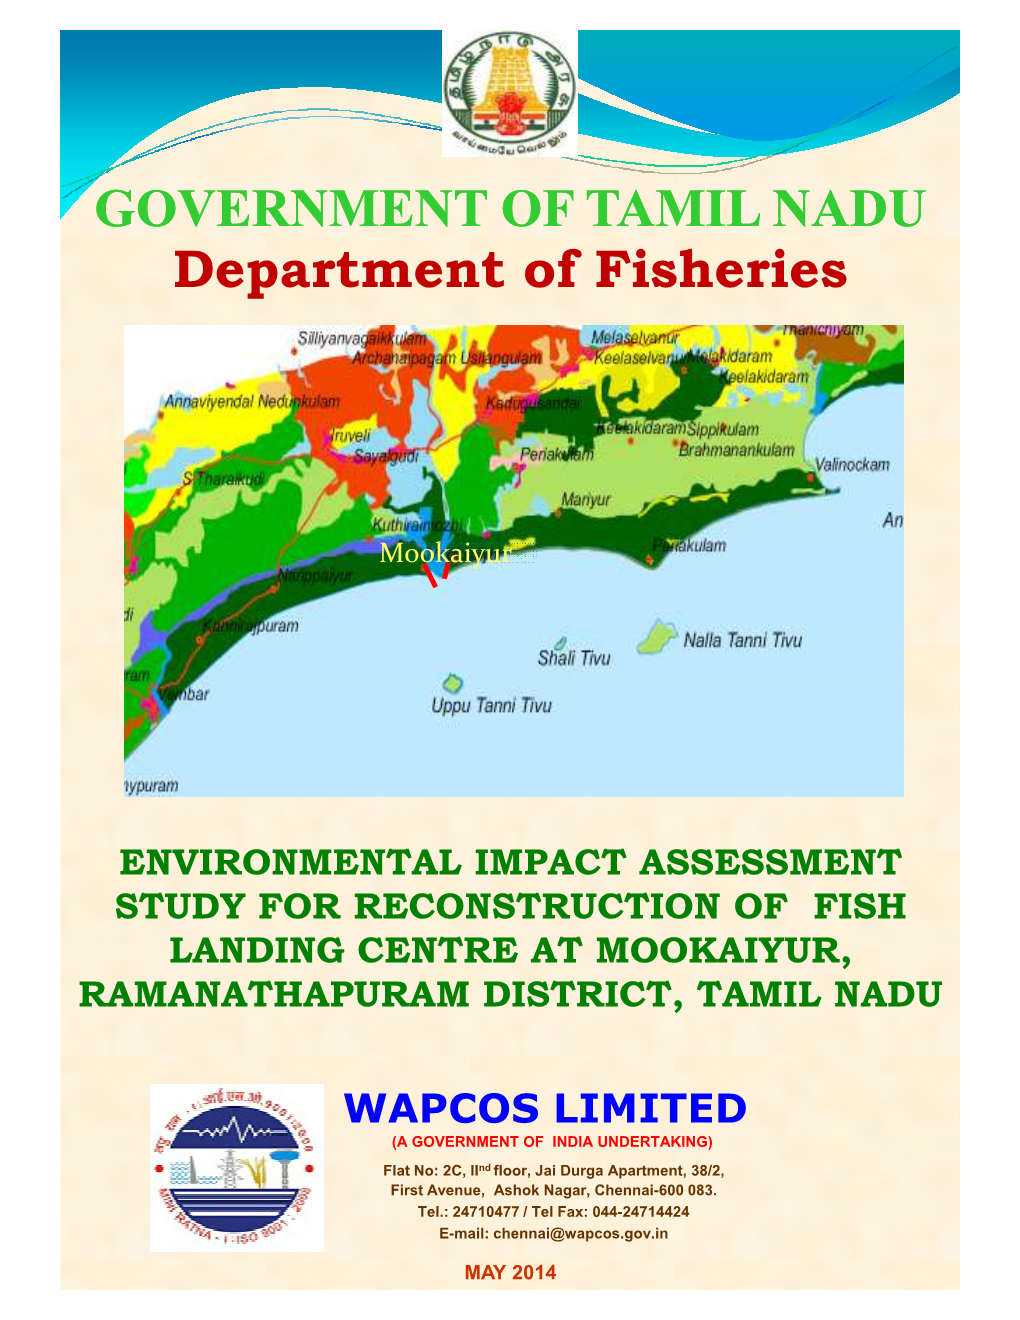 GOVERNMENT of TAMIL NADU Department of Fisheries